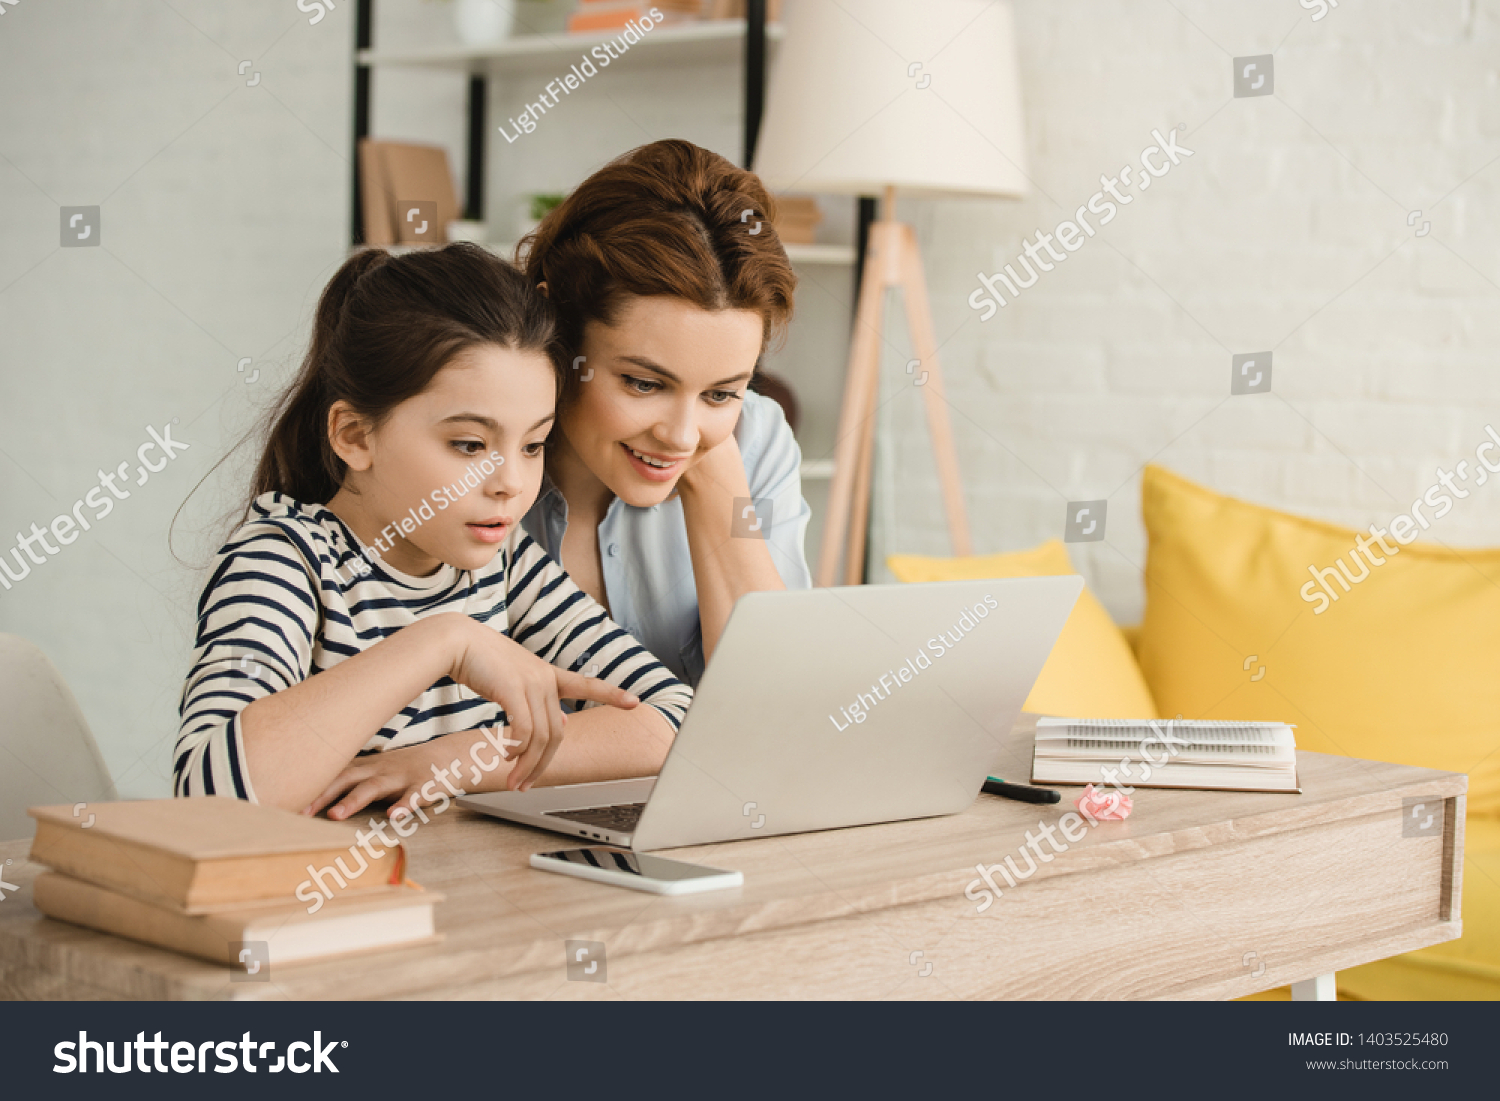 surprised mother and daughter using laptop while doing homework together #1403525480